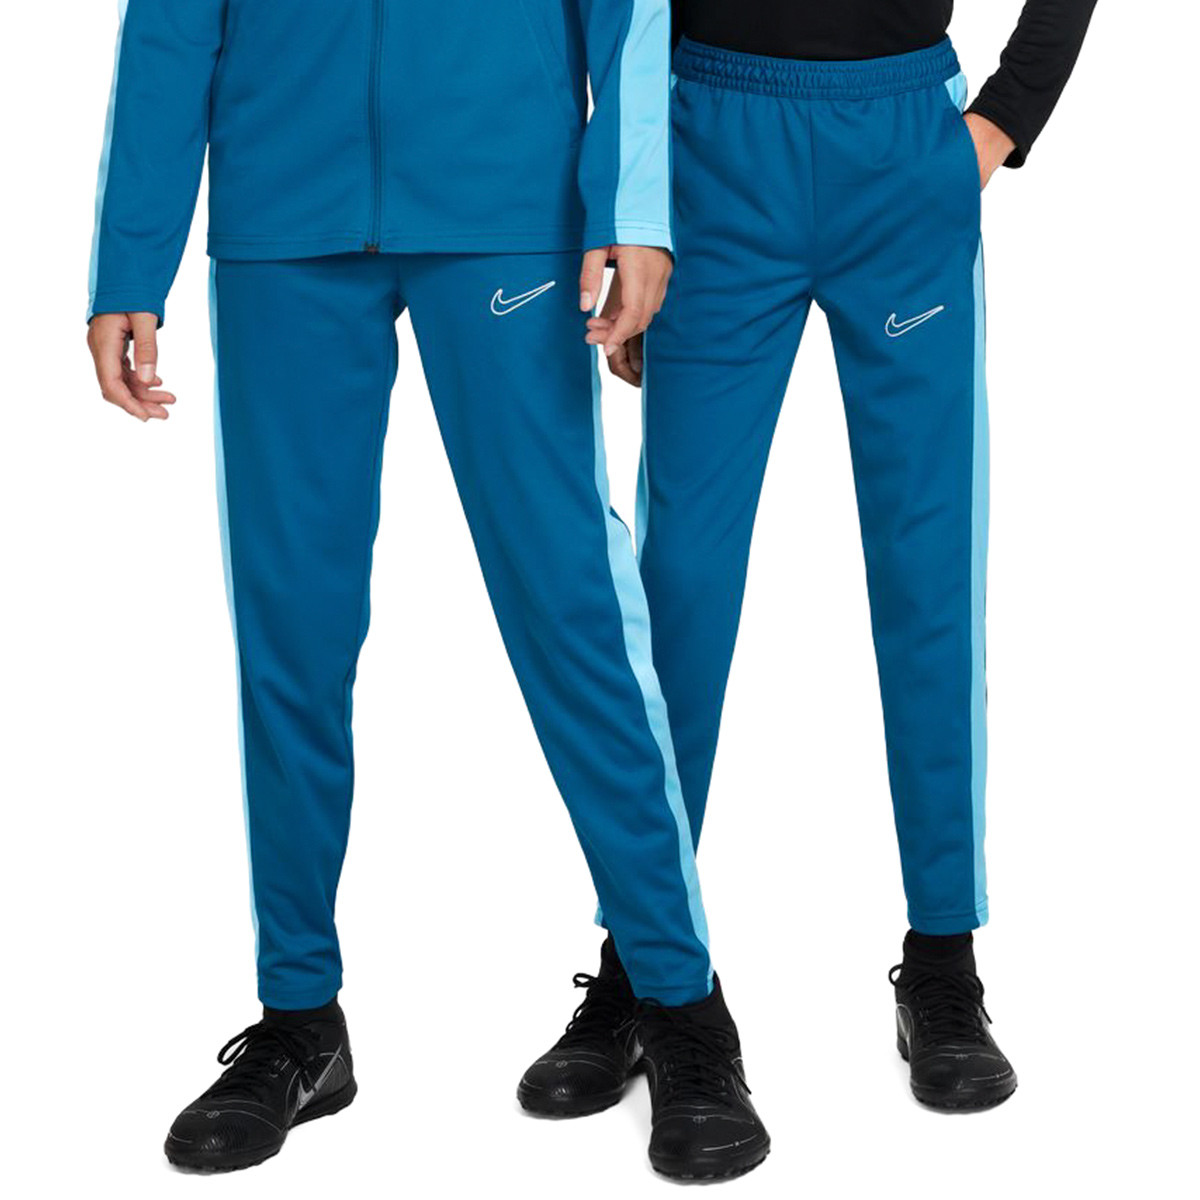 Academy Abyss-Baltic 23 Fútbol Kids Emotion Nike - Dri-Fit Green Blue-White Tracksuit